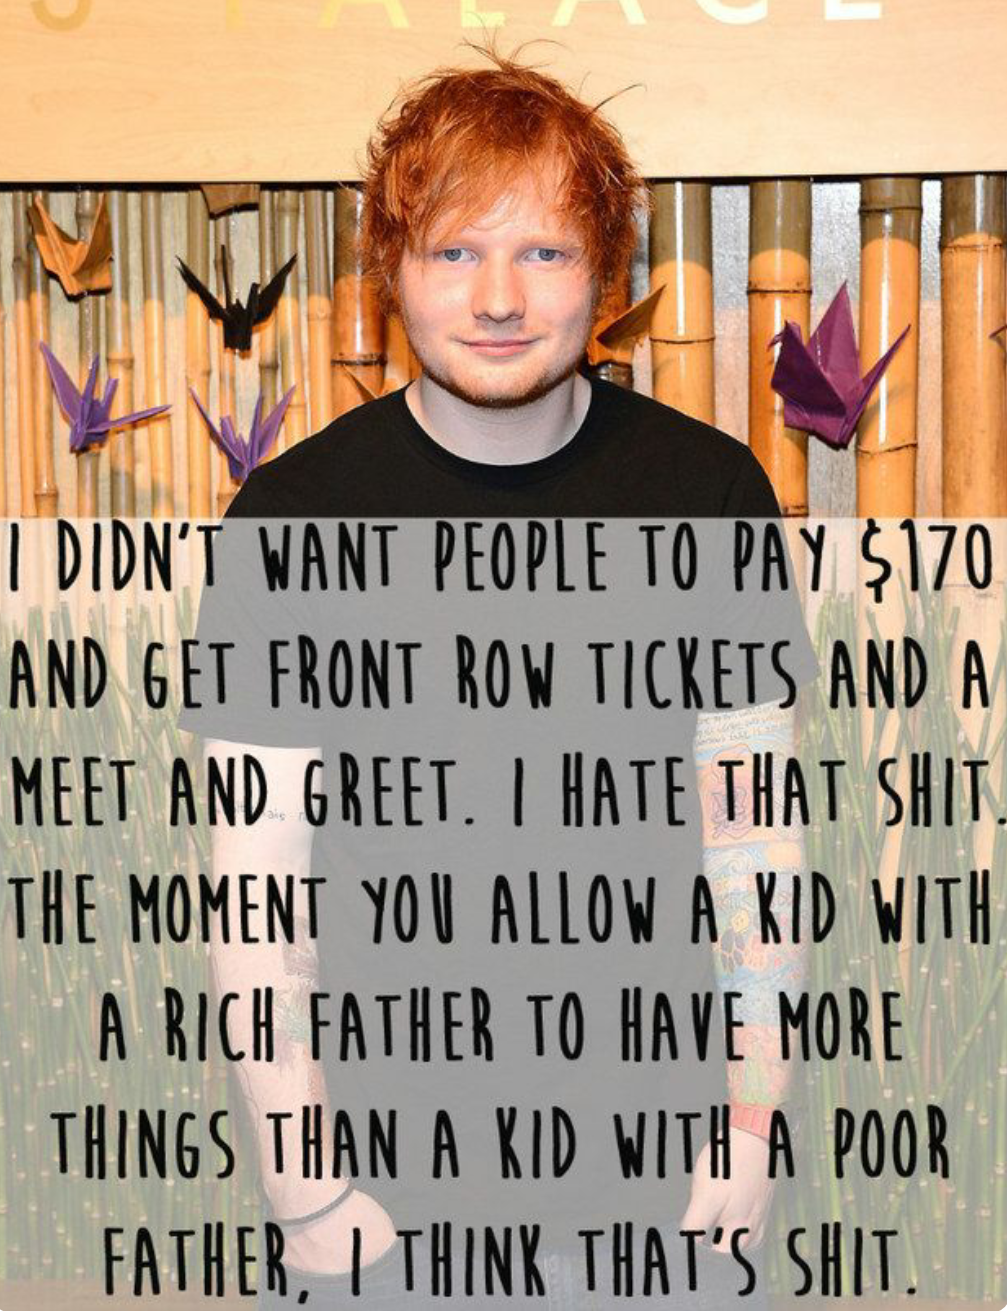 people hate the rich - I Didn'T Want People To Pay $170 And Get Front Row Tickets And A Meet And Greet. I Hate That Shit. The Moment You Allow A Kid With A Rich Father To Have More Things Than A Kid With A Poor Father, I Think That'S Shit.